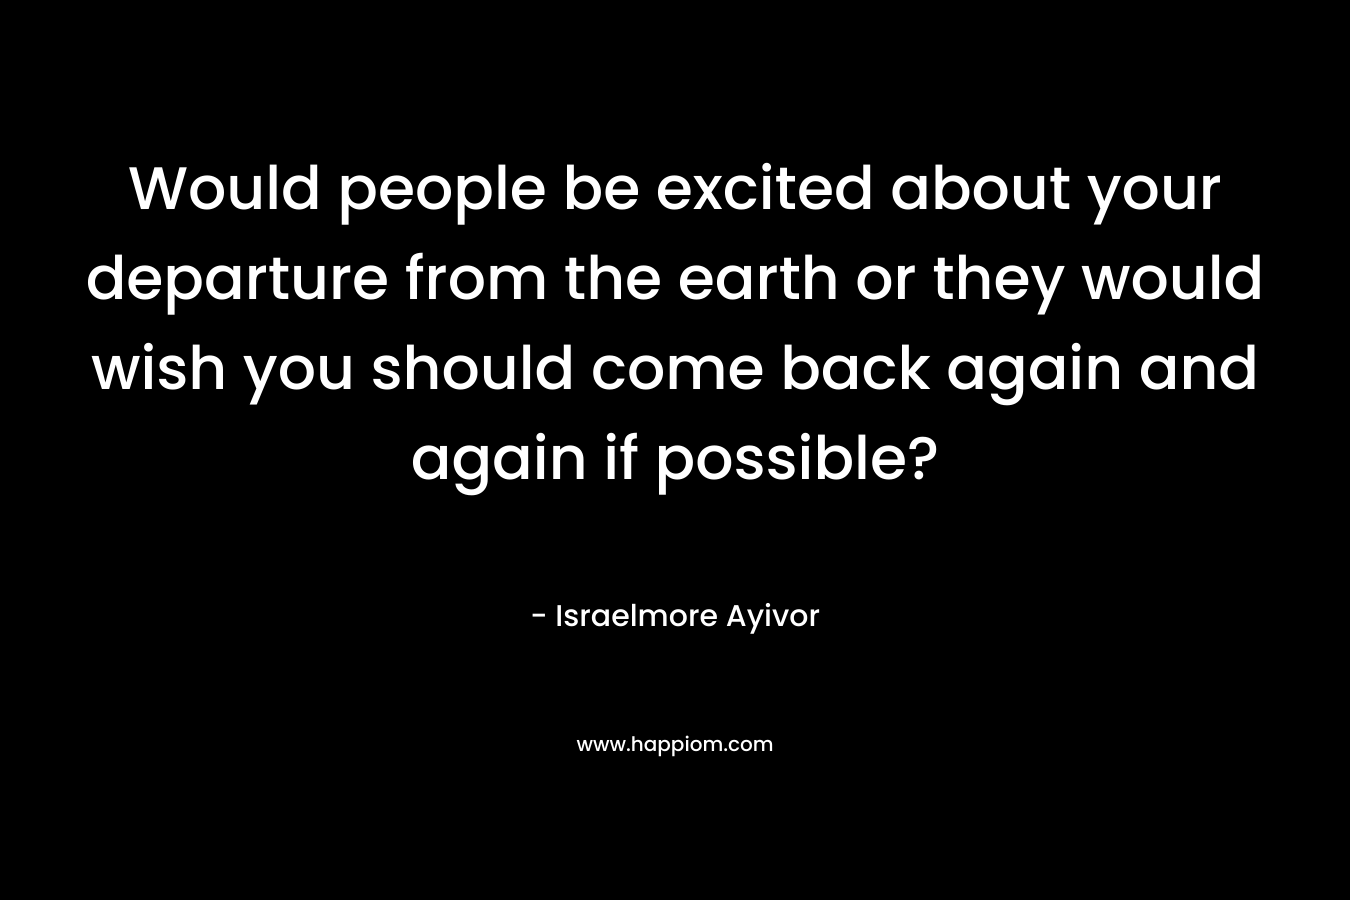 Would people be excited about your departure from the earth or they would wish you should come back again and again if possible?